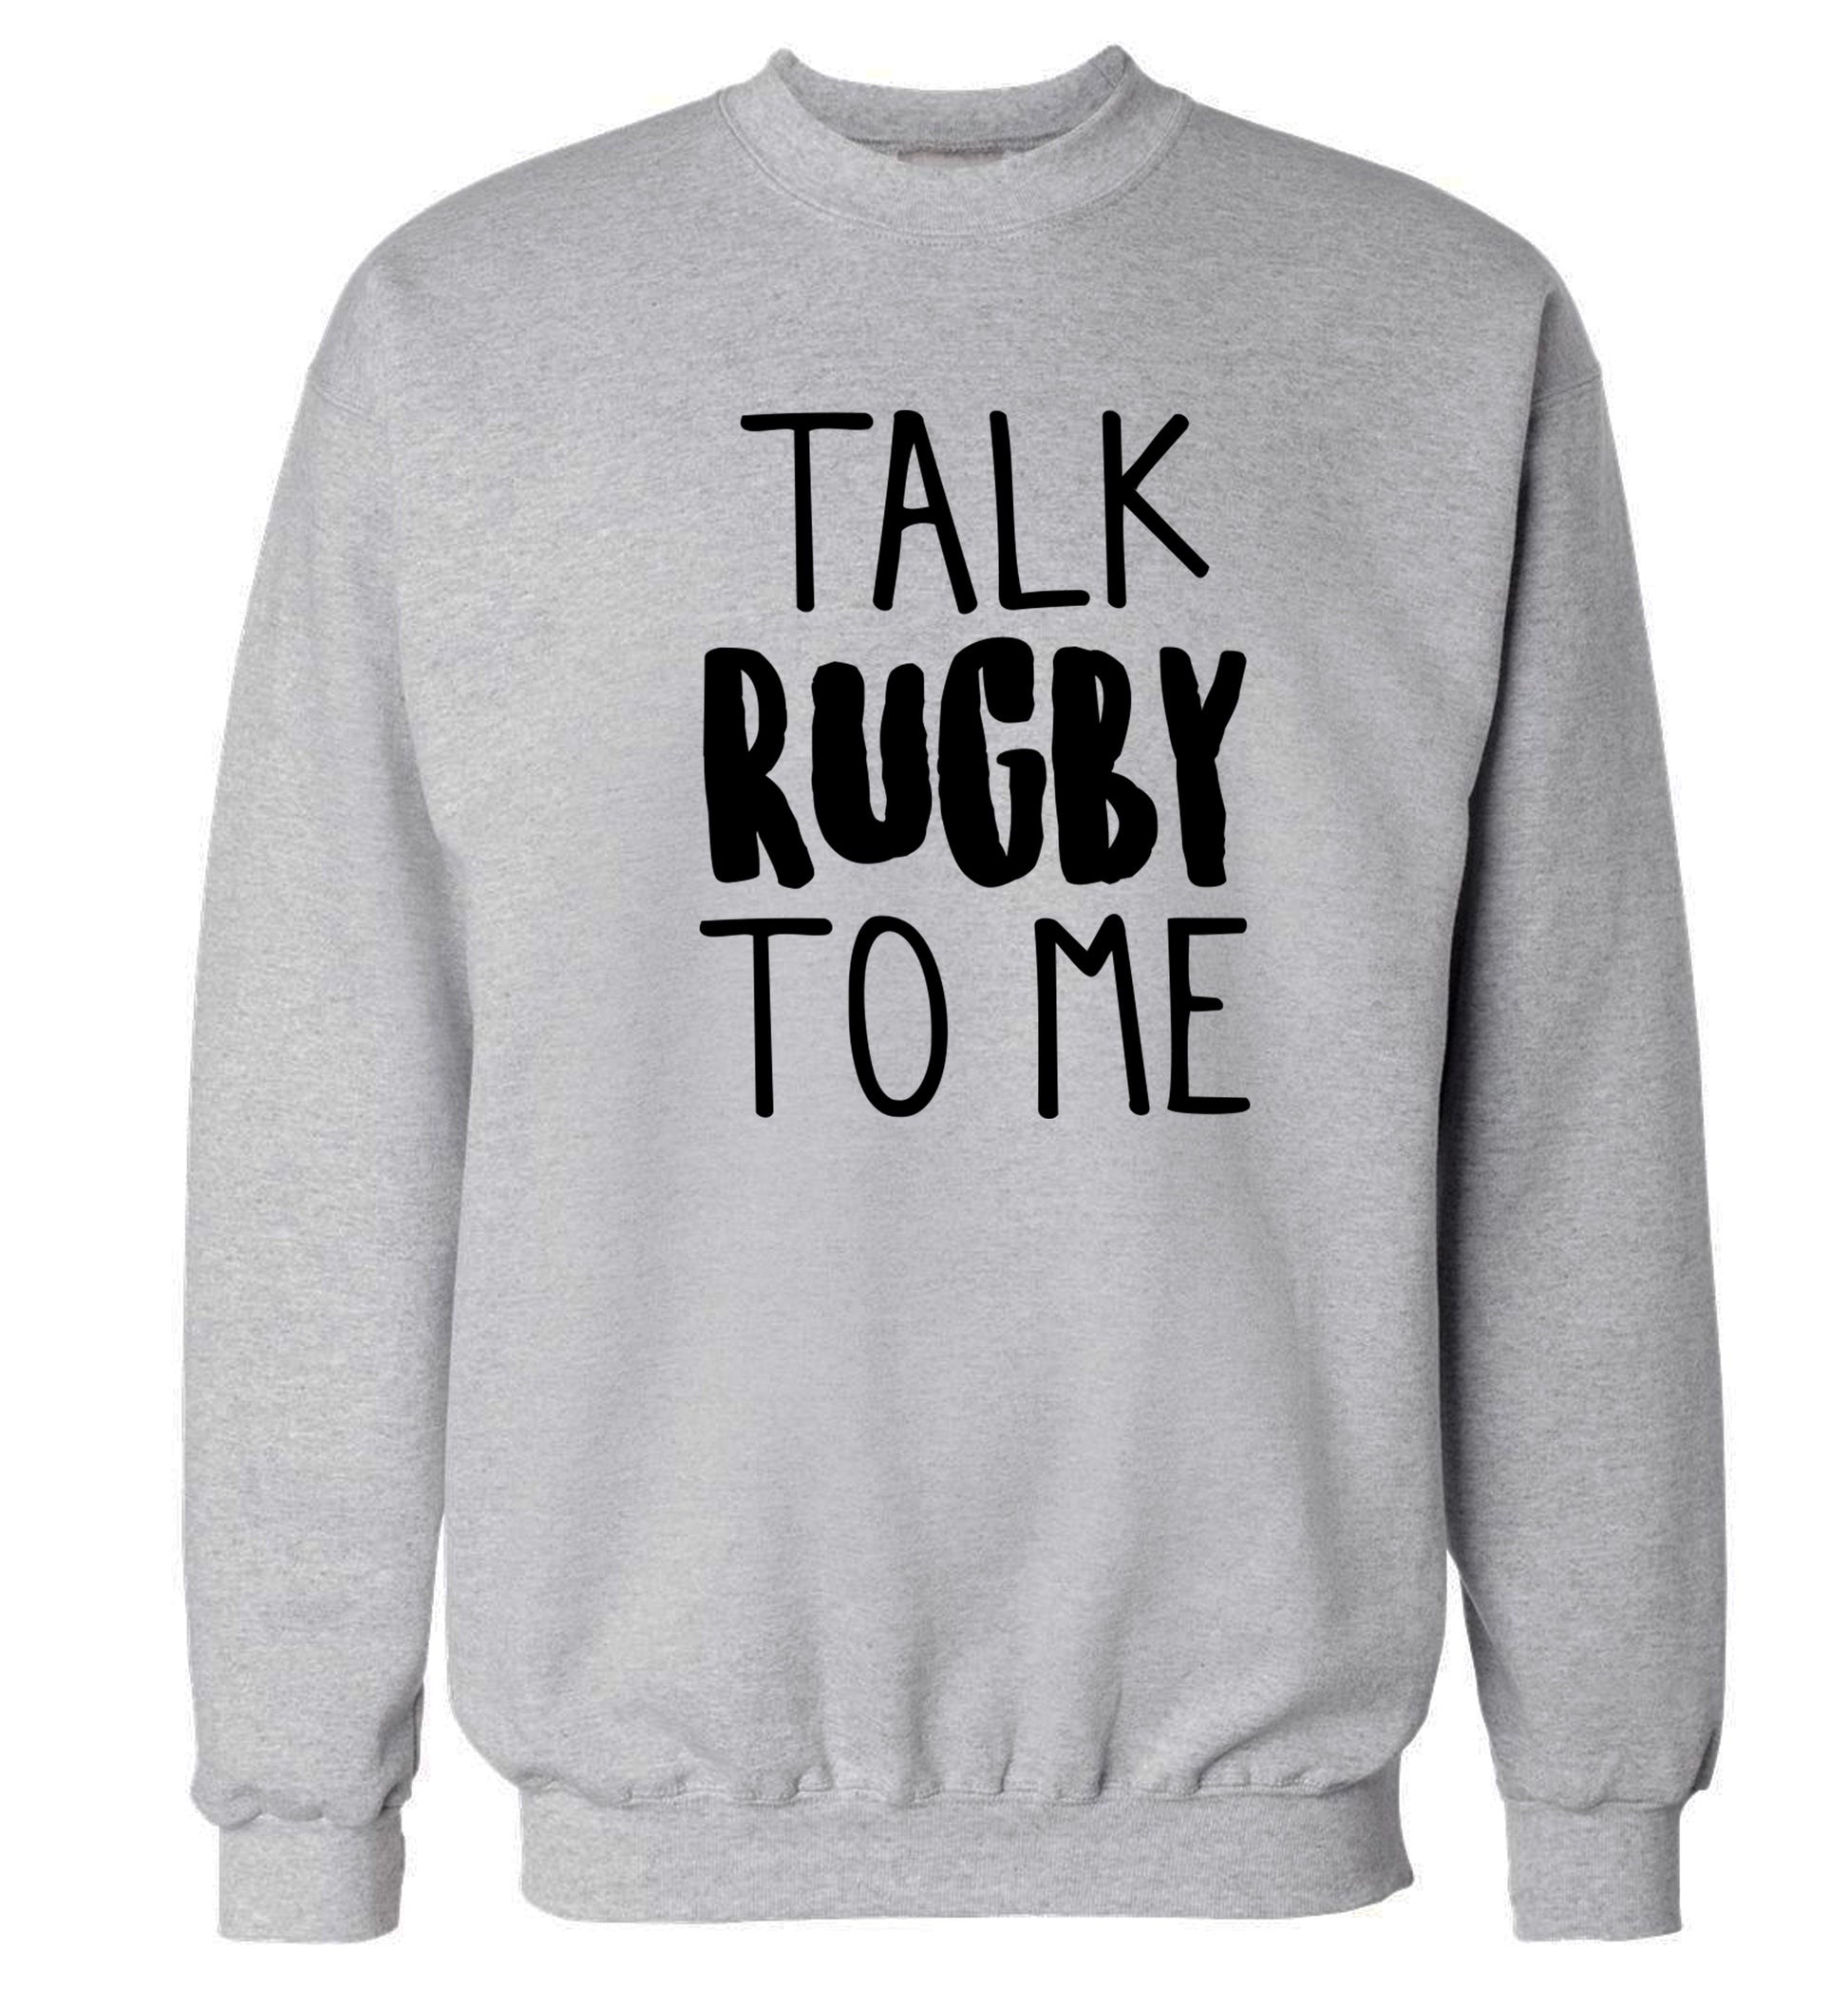 Talk rugby to me Adult's unisex grey Sweater 2XL